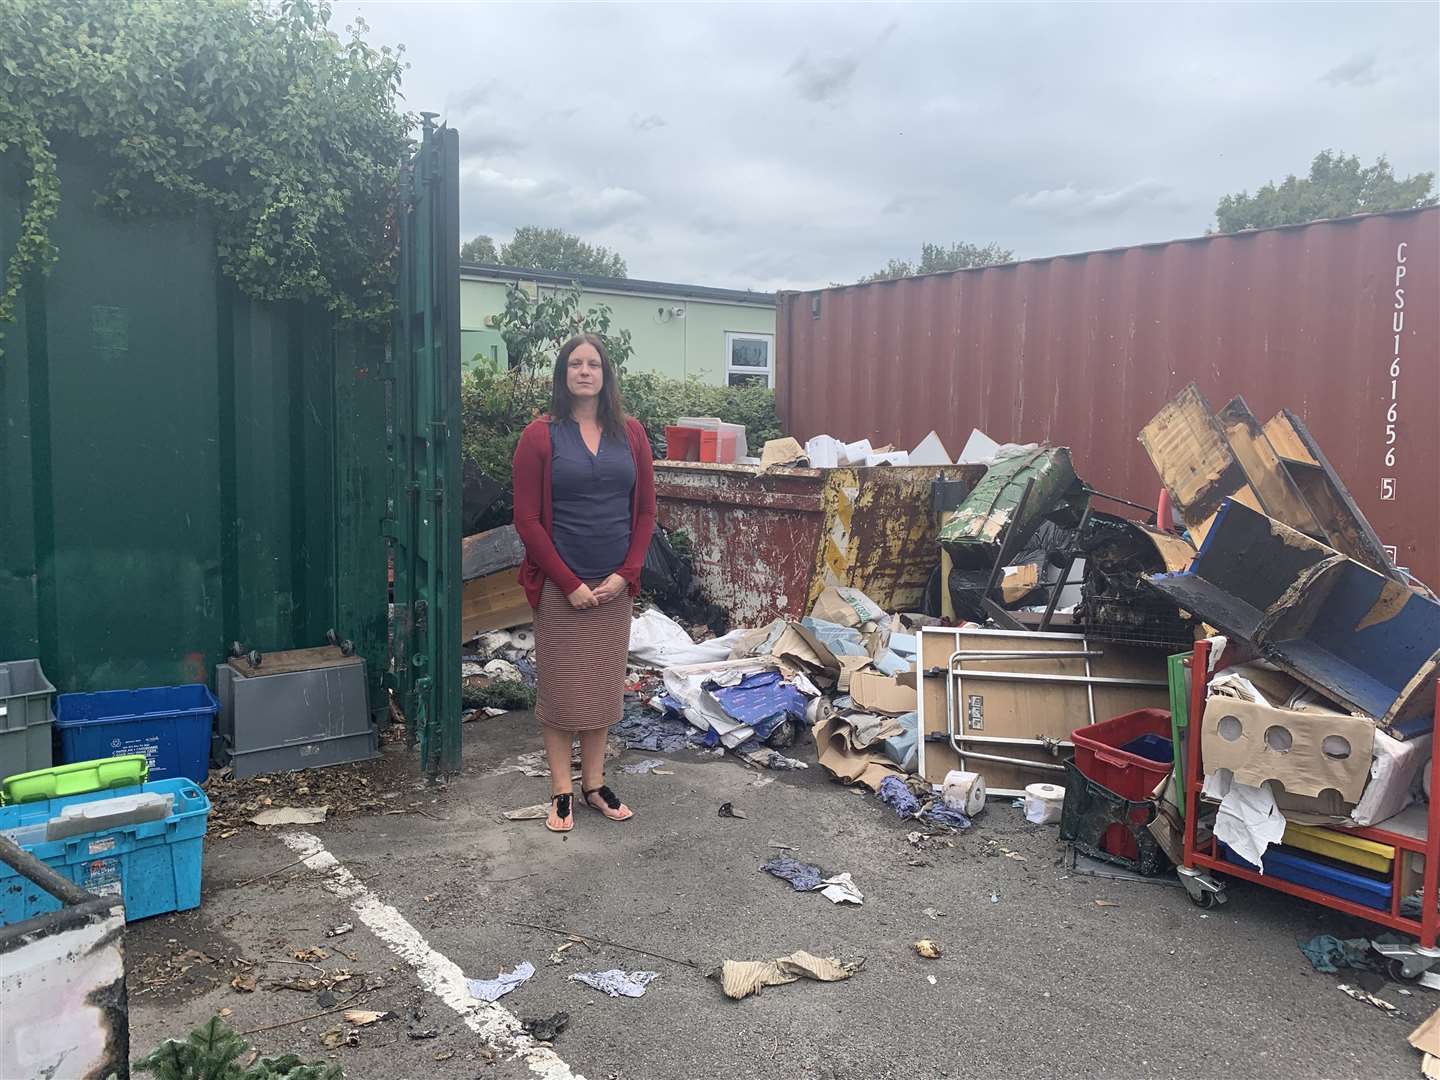 Acting head, Tracy Cadwallader, with damage to storage units at South Avenue Primary School in Sittingbourne